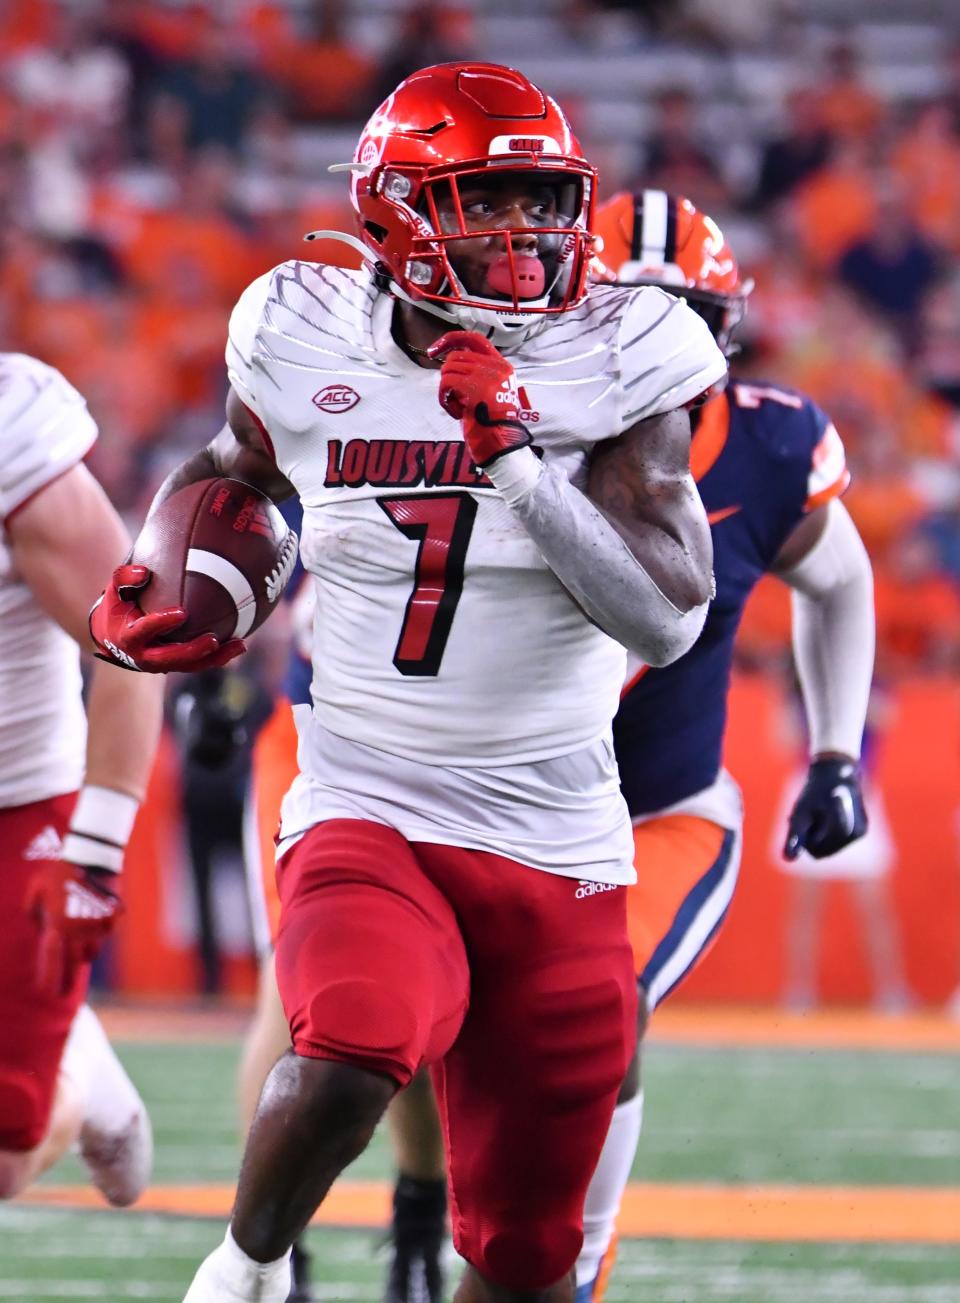 Sep 3, 2022; Syracuse, New York, USA; Louisville Cardinals running back Tiyon Evans (7) runs for a touchdown against the Syracuse Orange in the first quarter at JMA Wireless Dome. Mandatory Credit: Mark Konezny-USA TODAY Sports